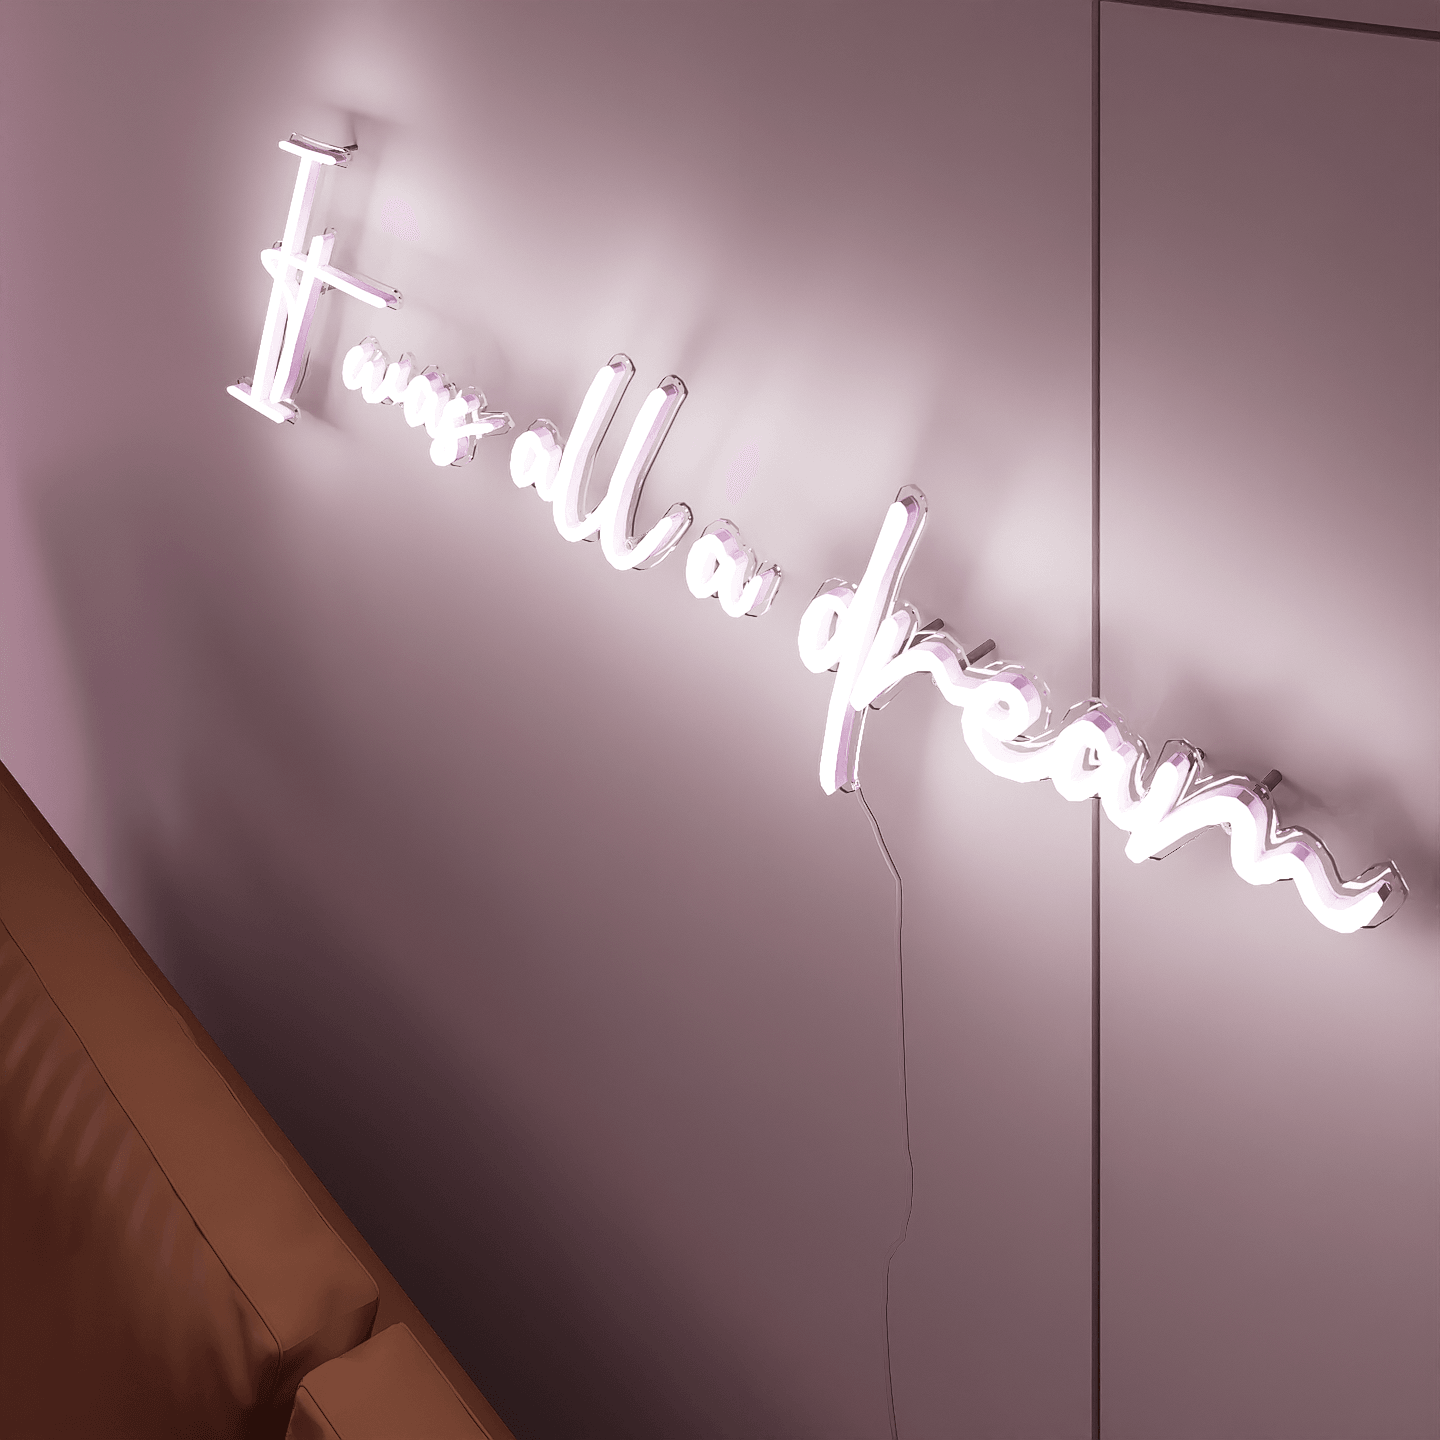 side-shot-of-lit-white-neon-lights-hanging-on-wall-for-display-it-was-all-a-dream